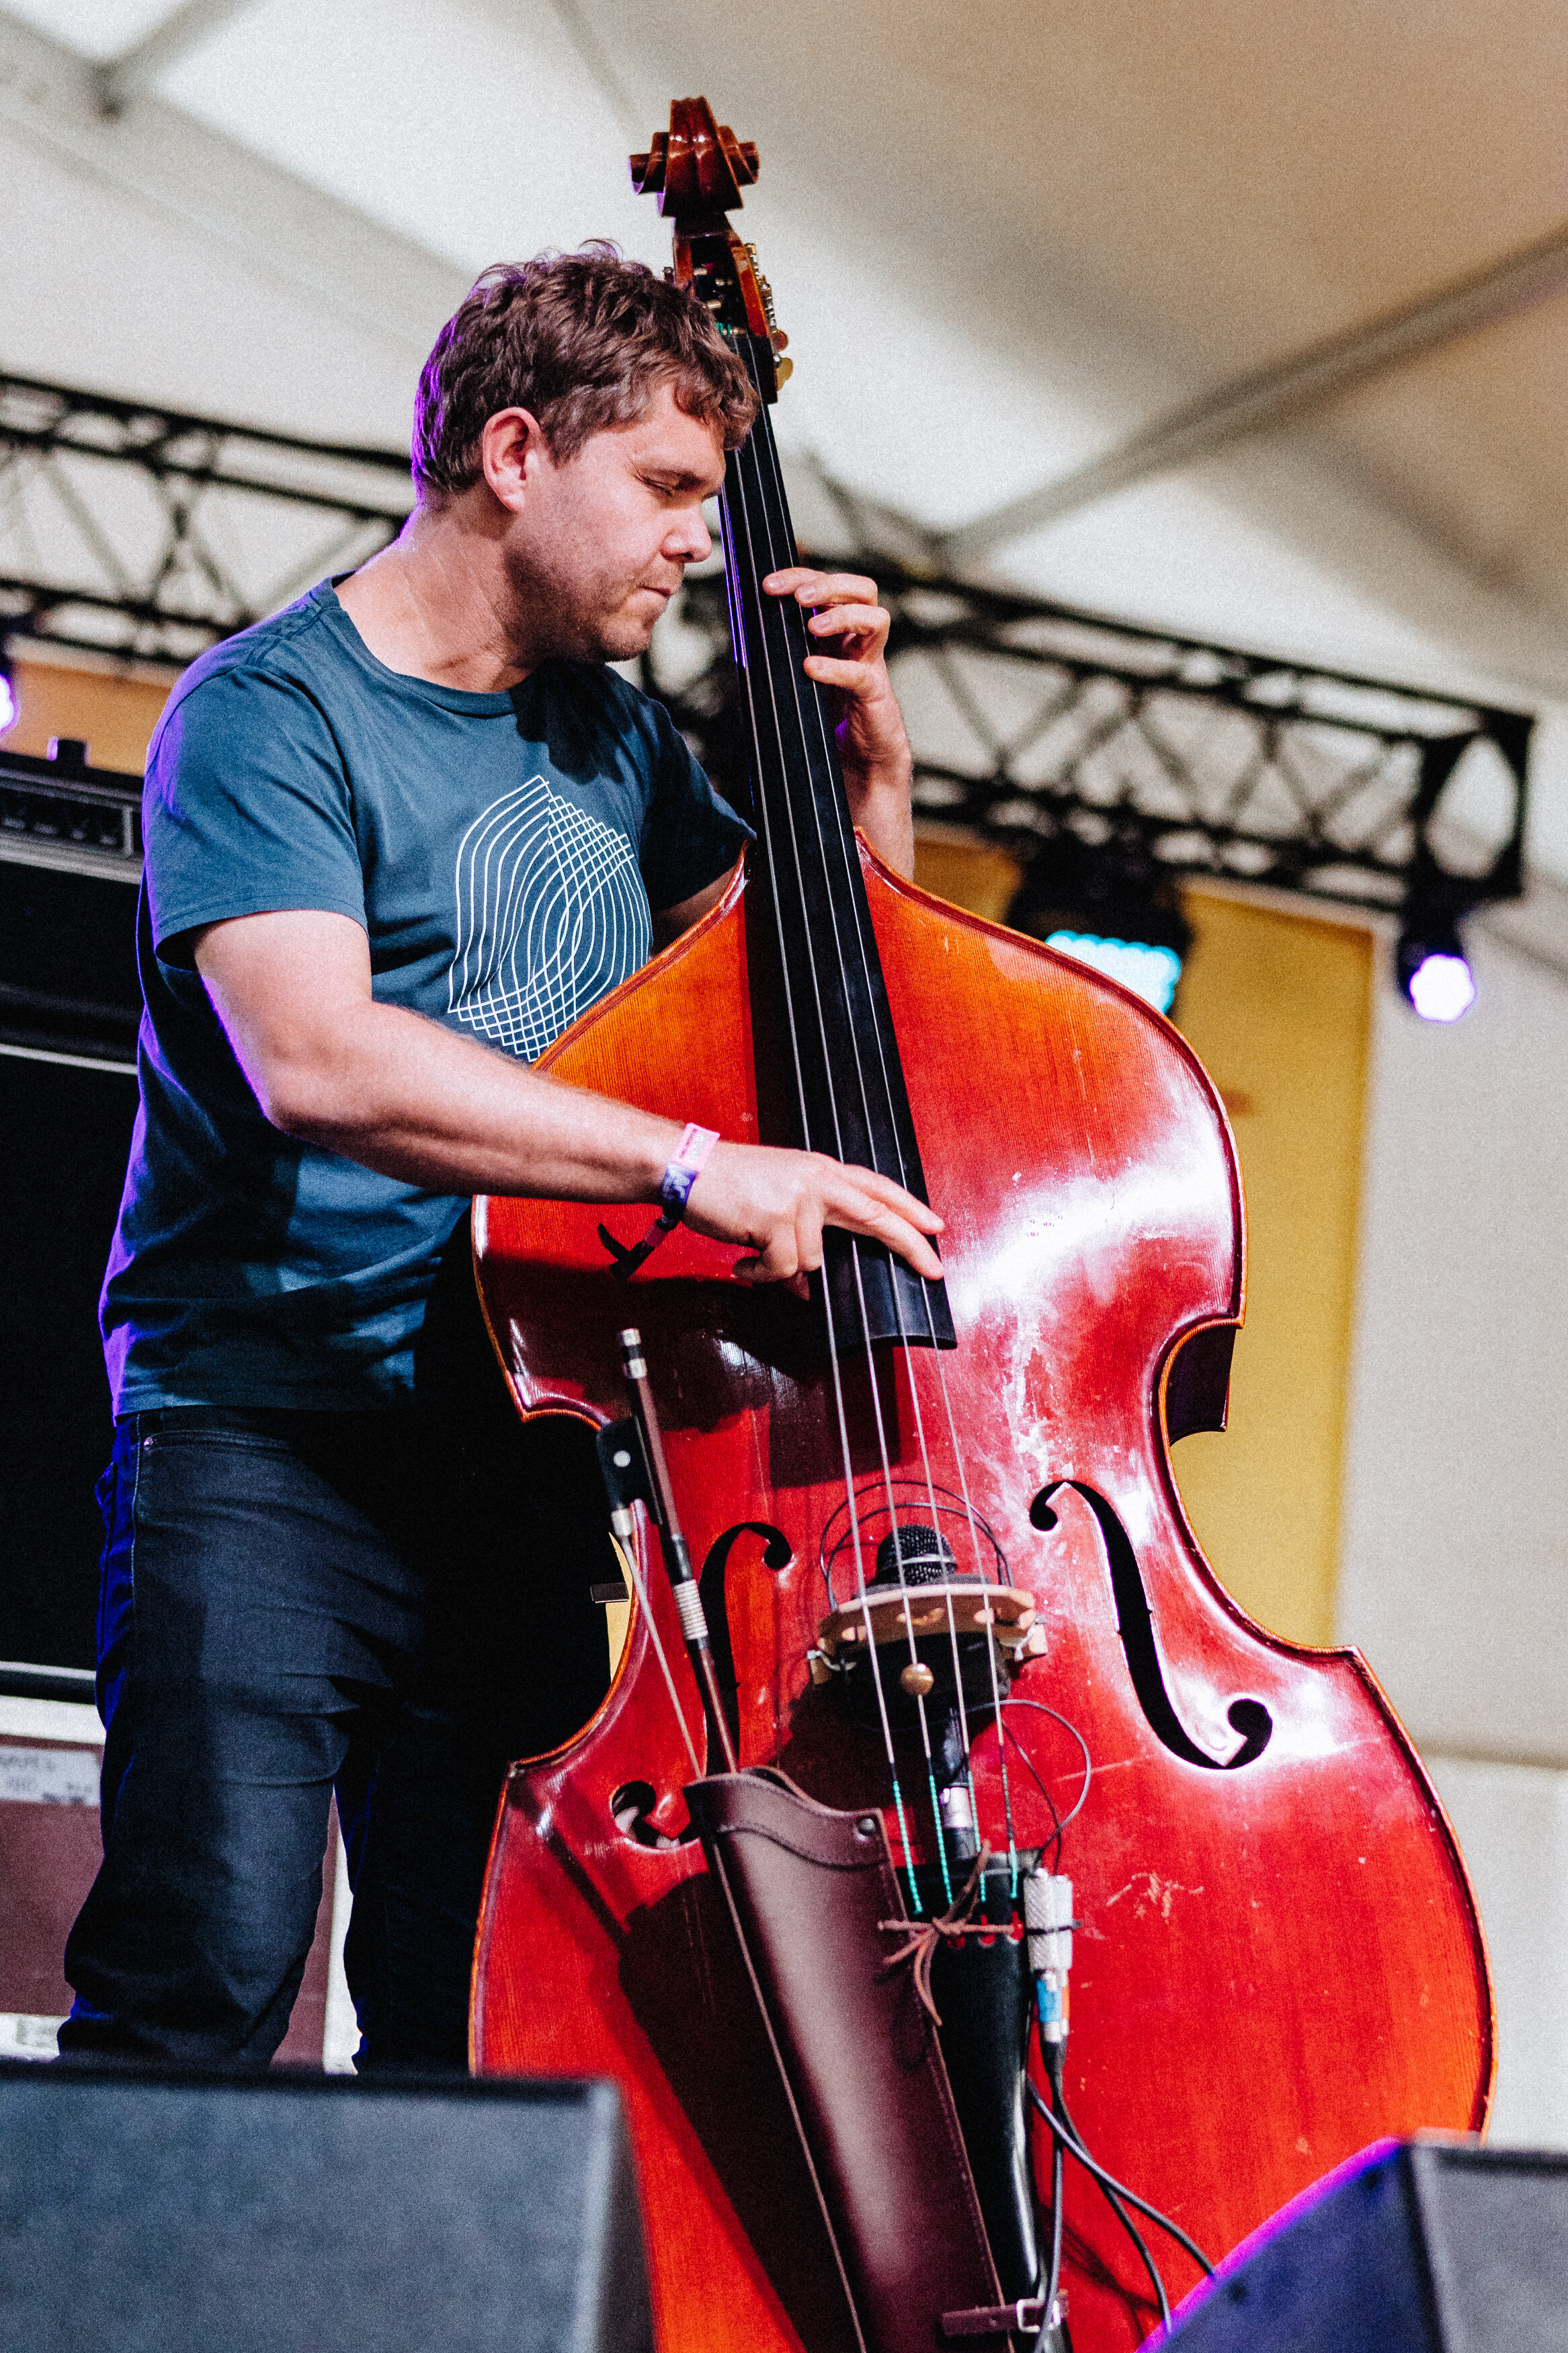 GOGO PENGUIN by Chad Wadsworth for ACL Fest W2 2019  DSC06226.jpg